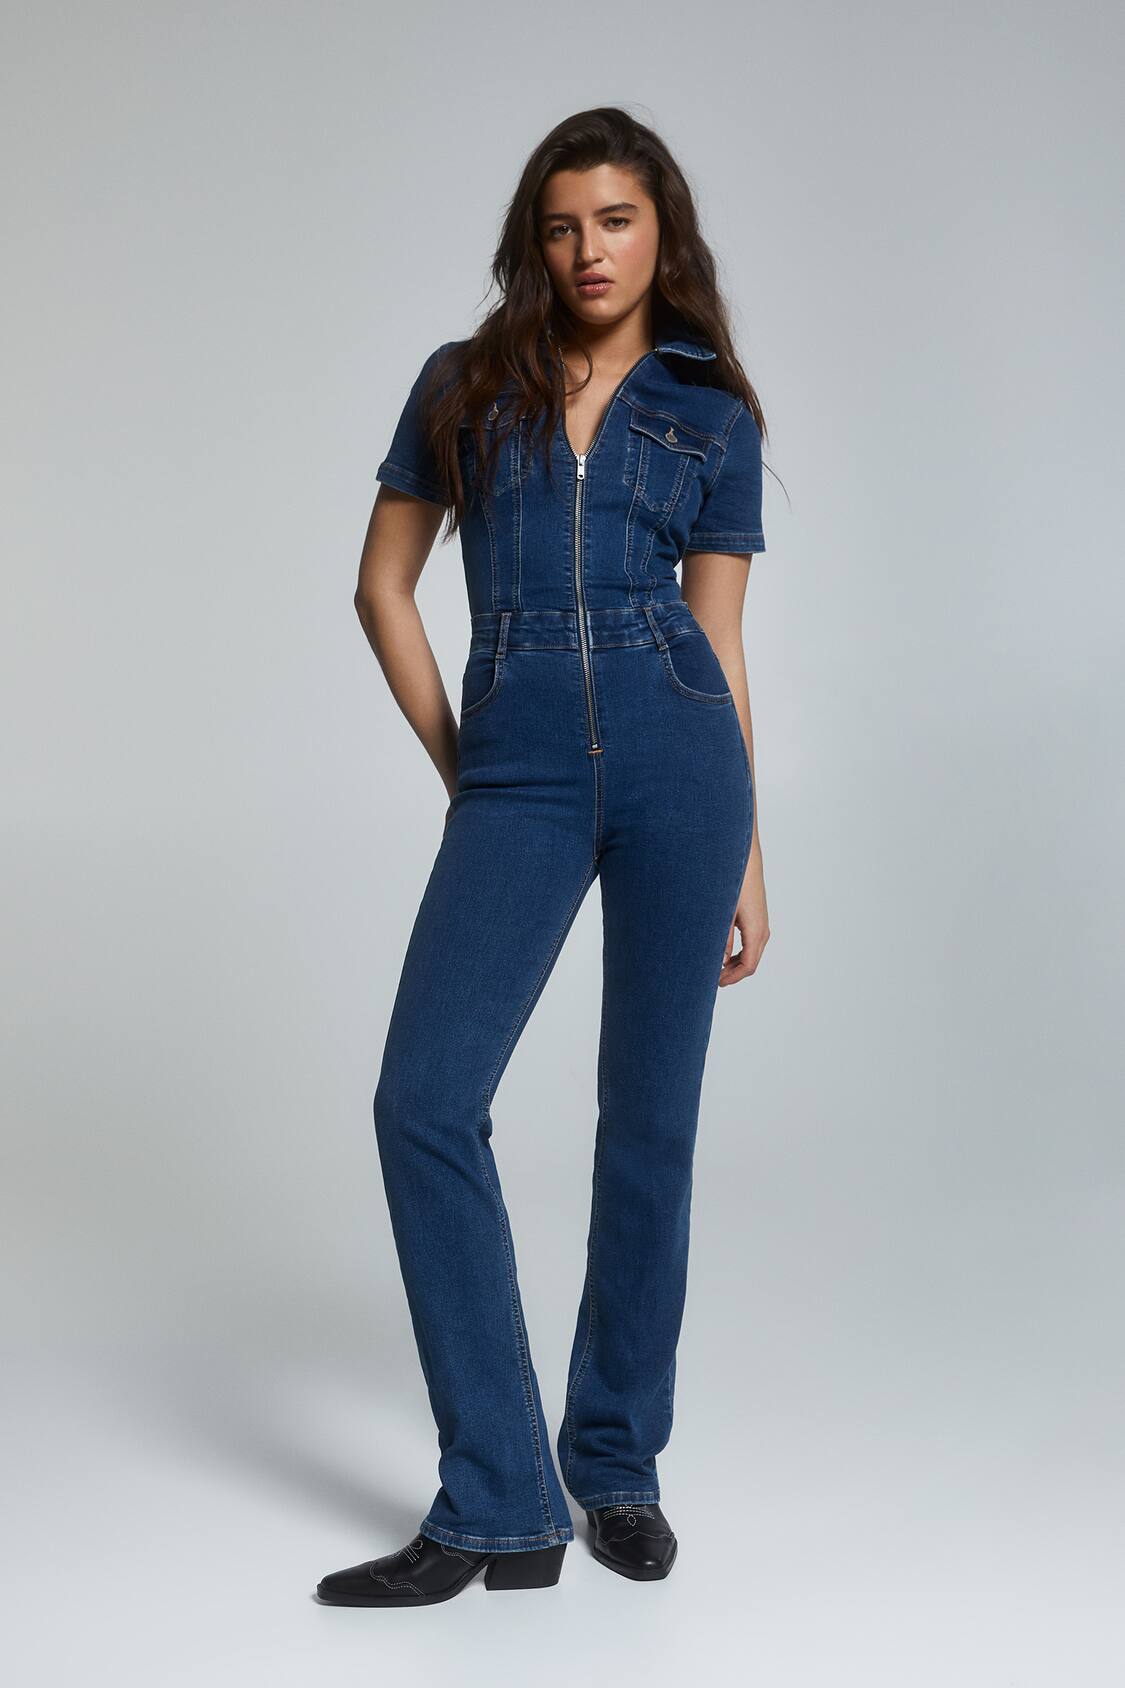 Denim jumpsuit with short sleeves - PULL&BEAR